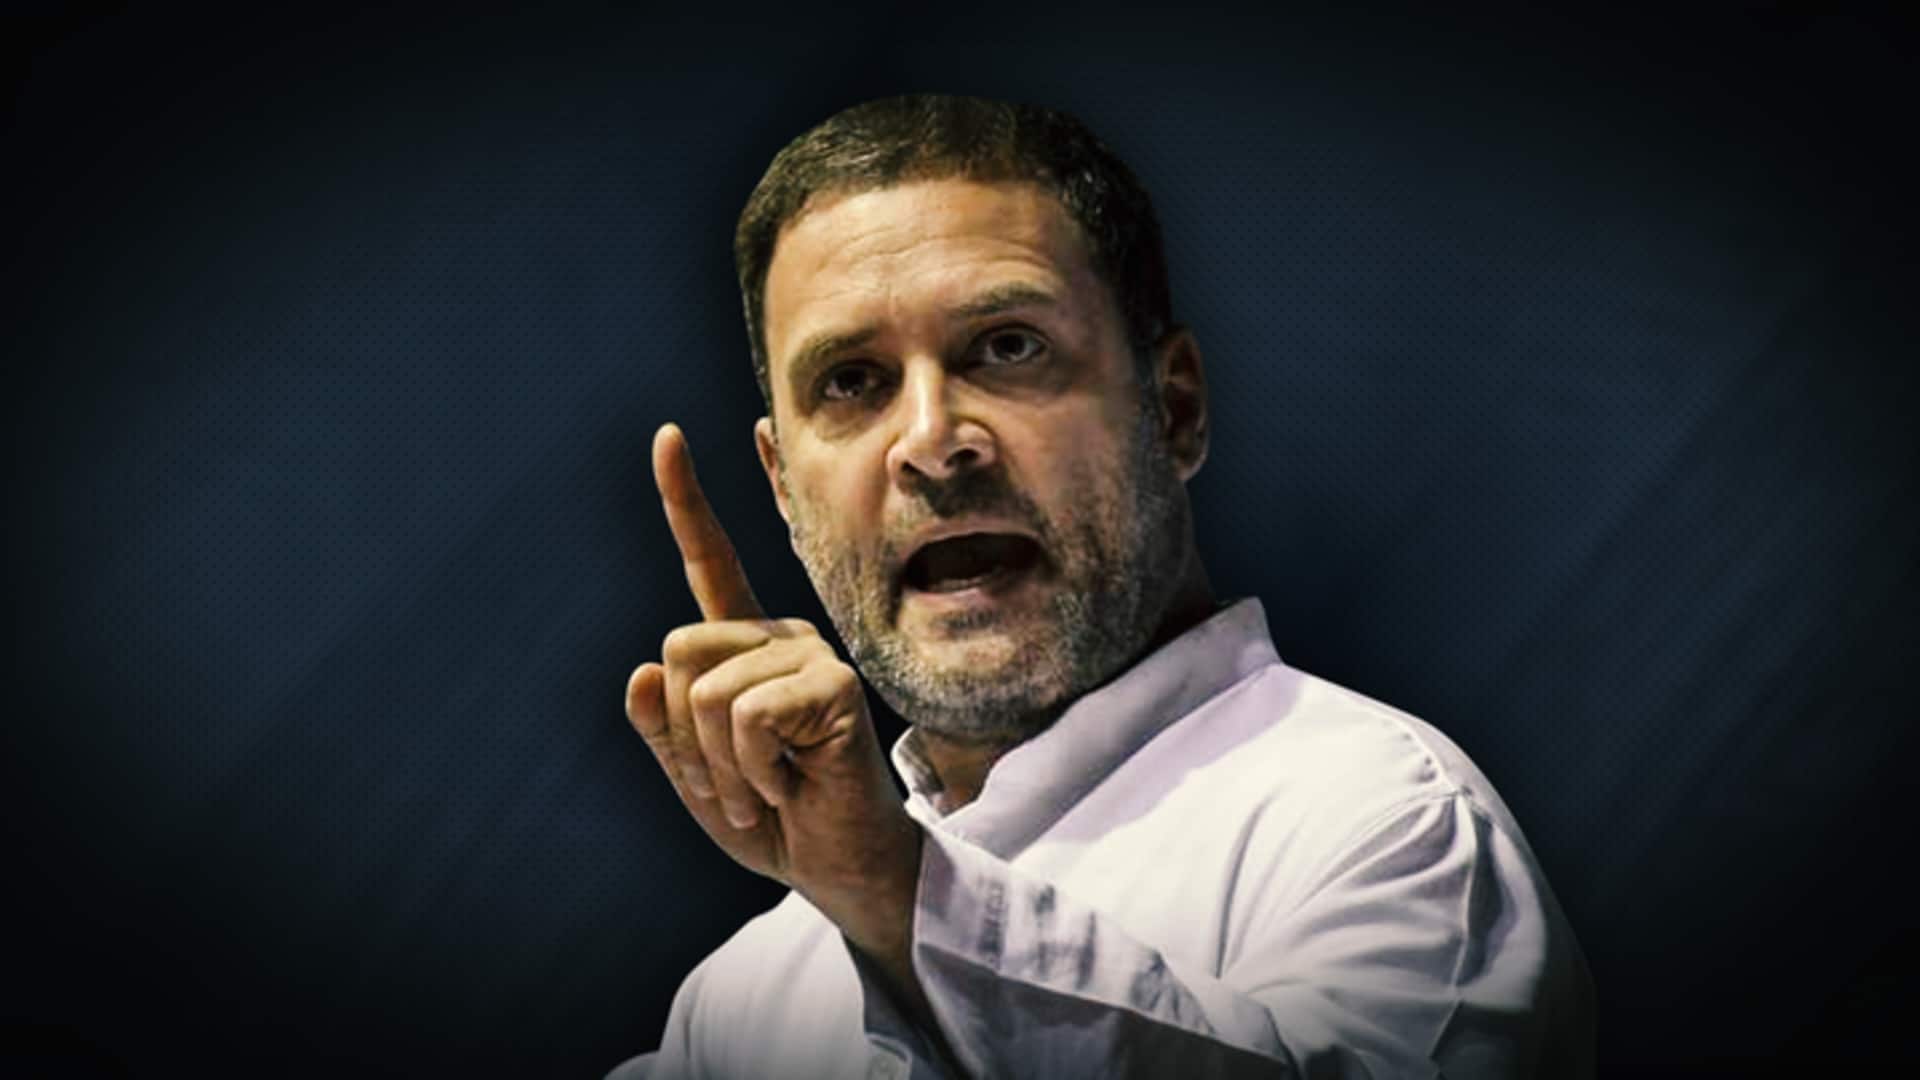 Rahul Gandhi to hold rally in US before Modi's visit